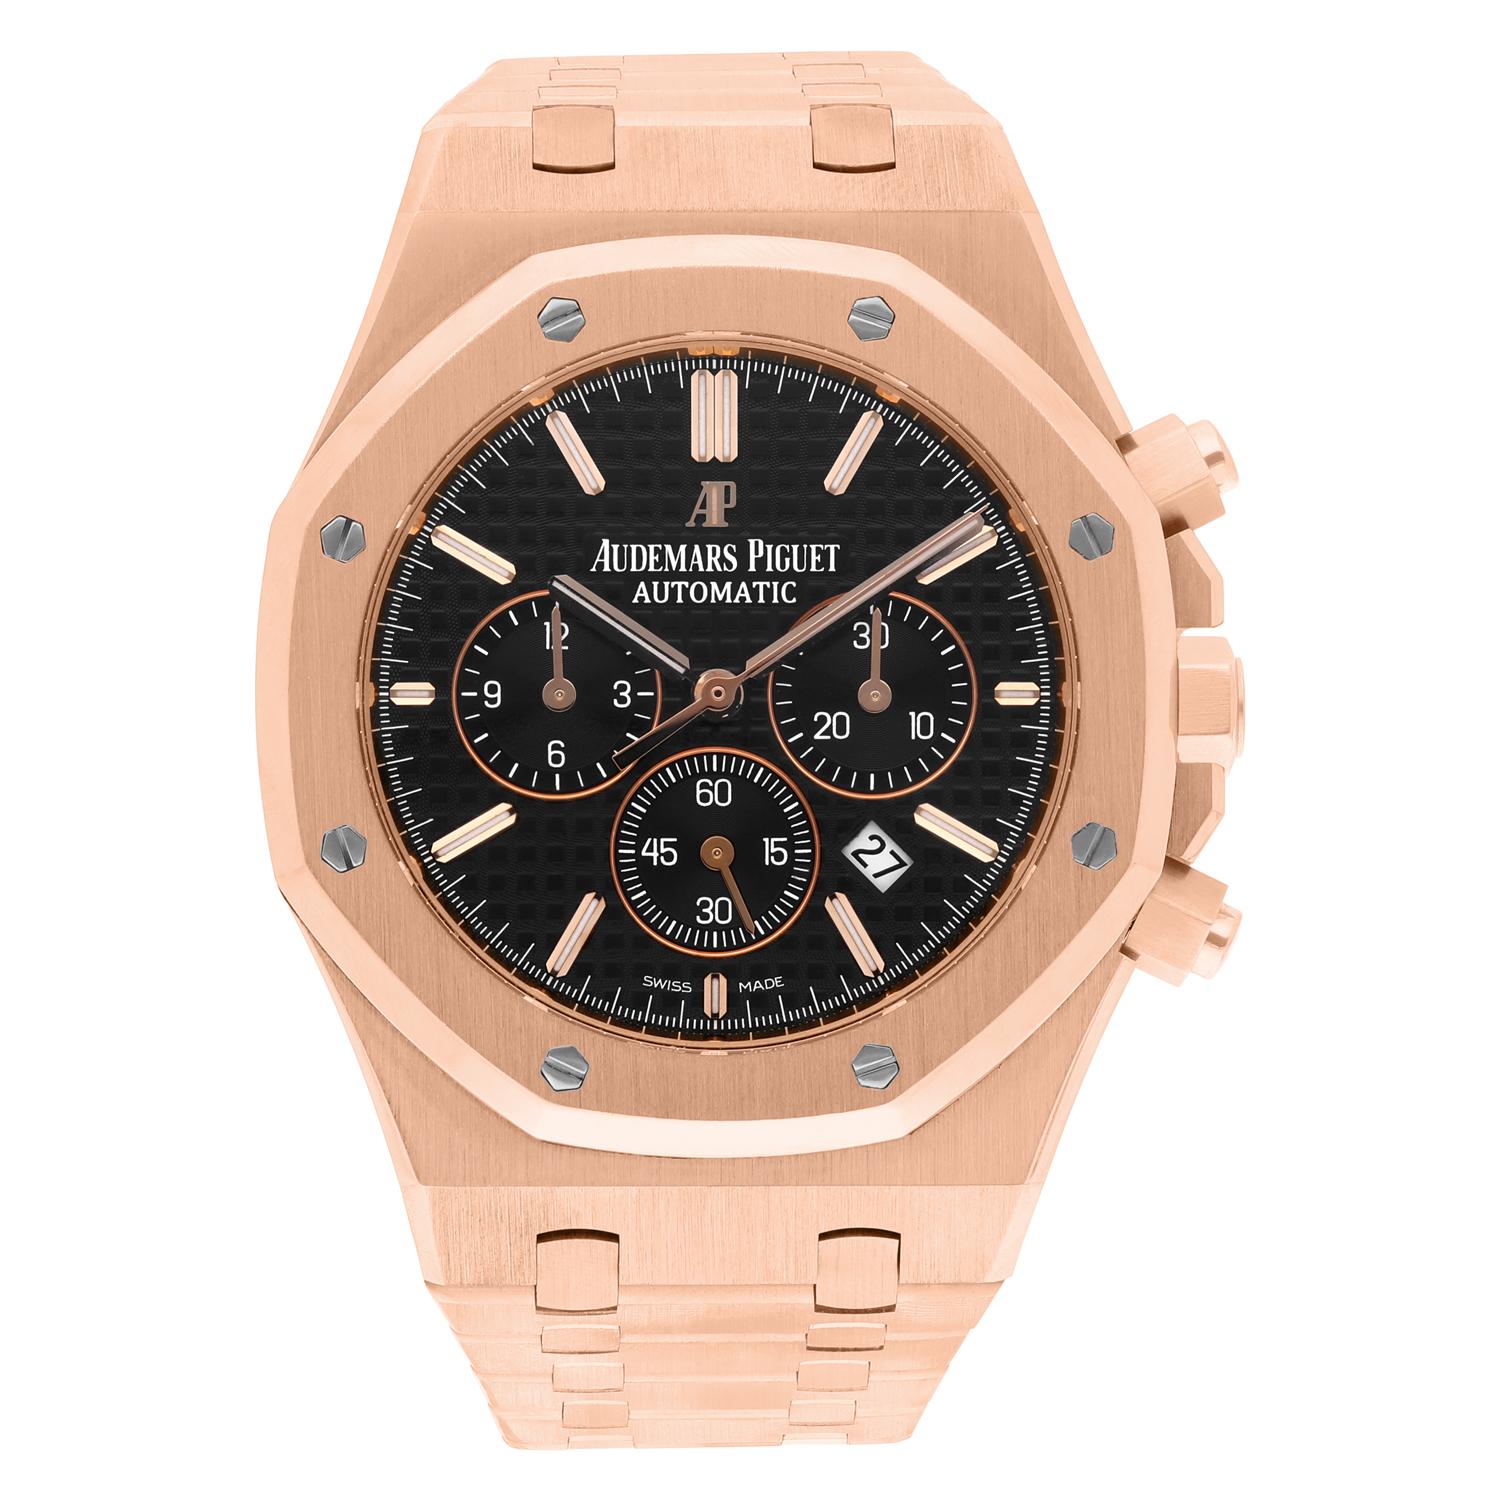 This Audemars Piguet Royal Oak Chrono watch for men is a stunning piece of jewelry that combines functionality and style. With a rose gold bracelet and case, and a black dial with index hour markers, this watch is perfect for those who appreciate